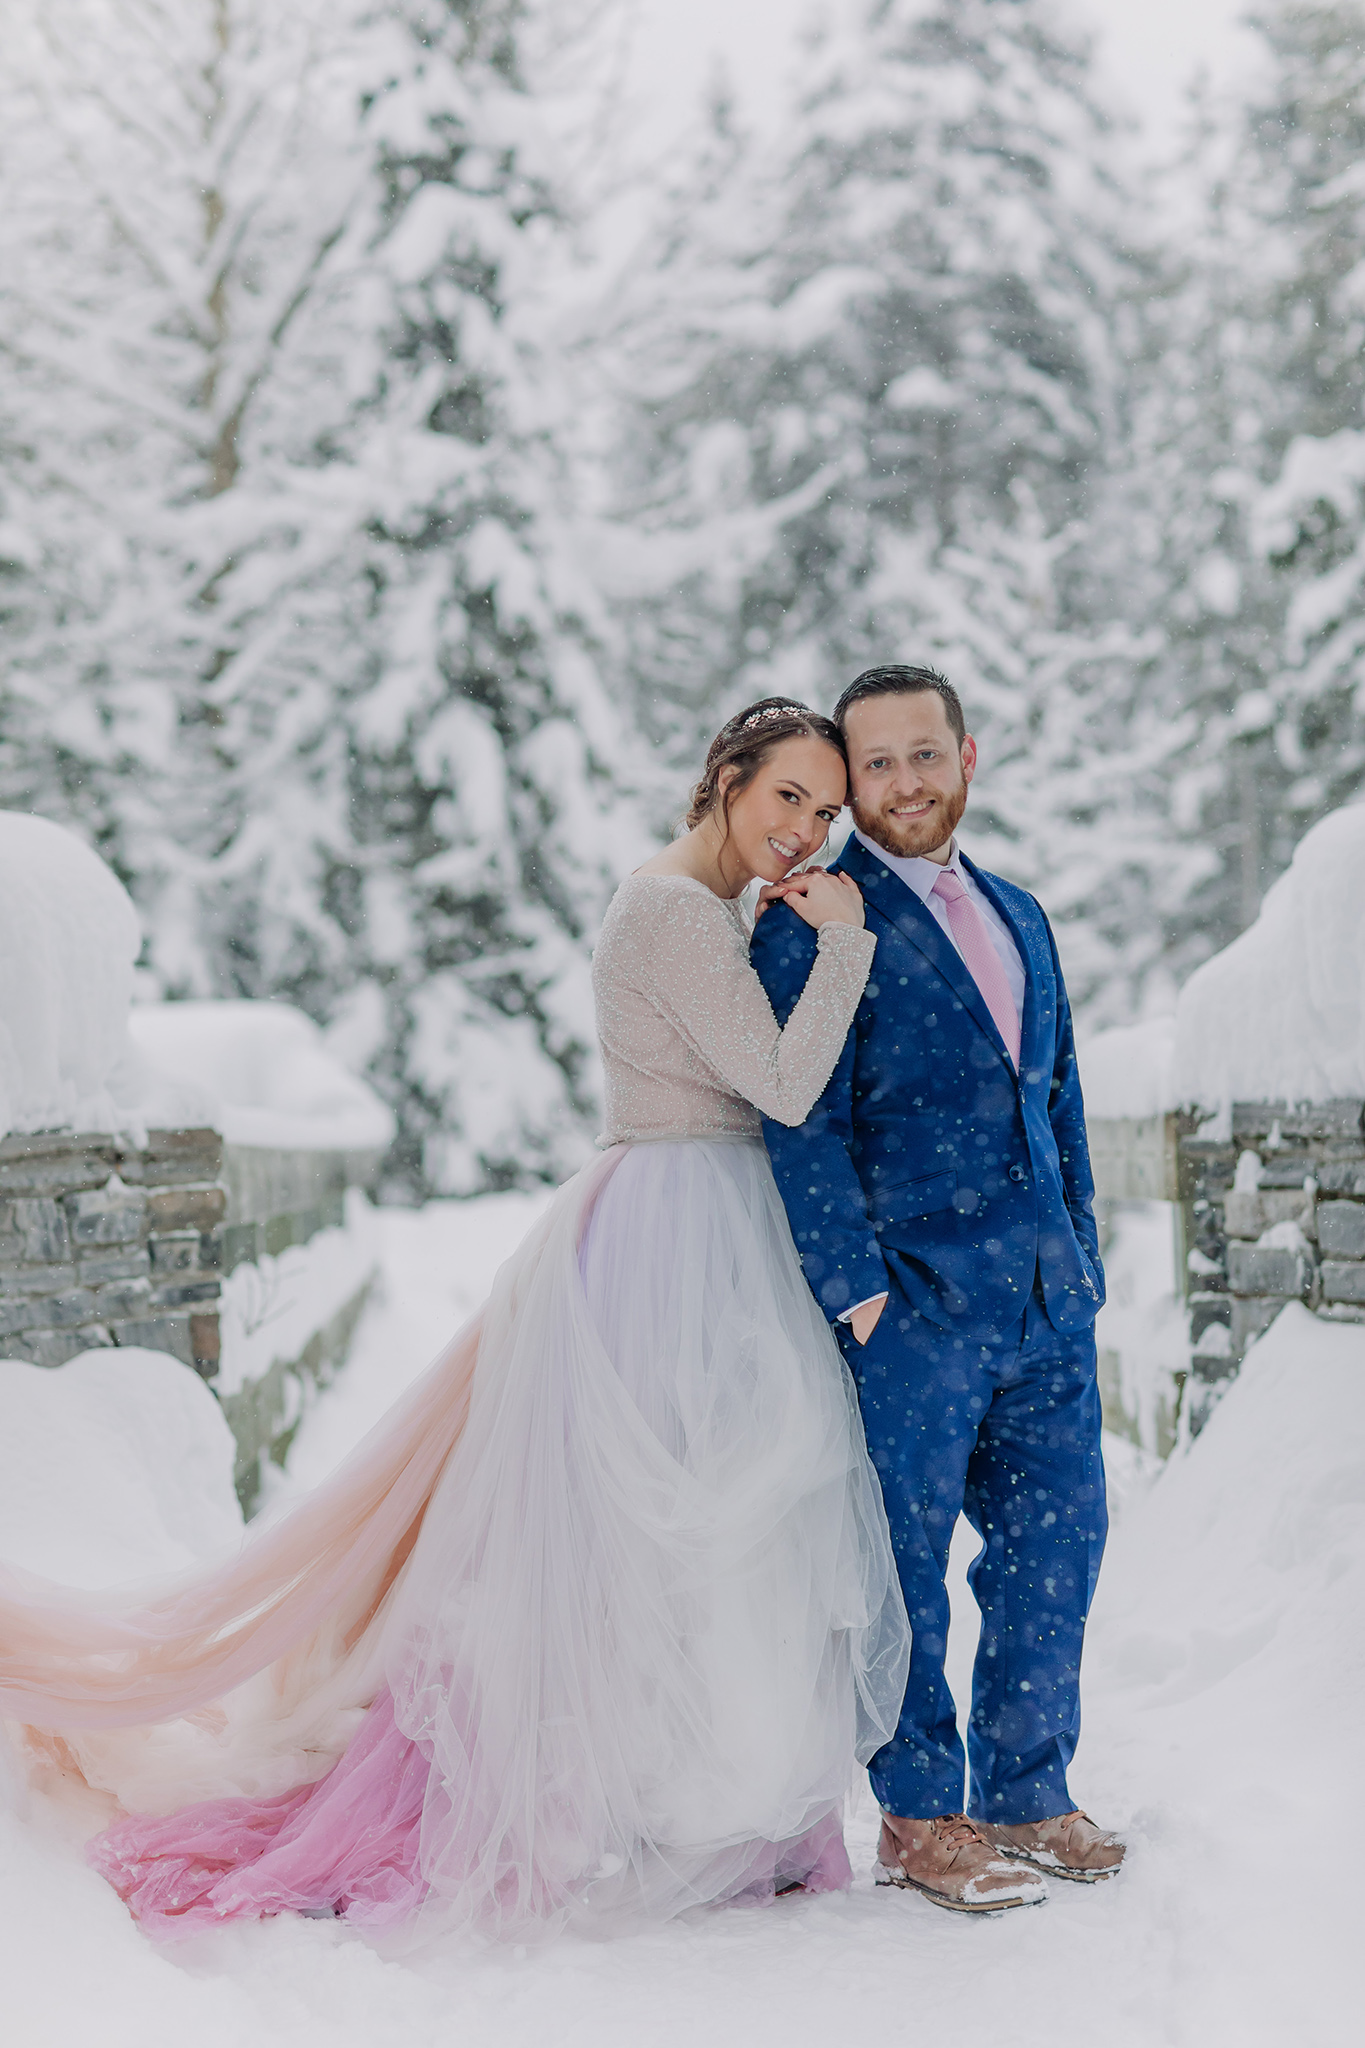 Post Hotel wedding portraits on the bridge over the Bow River on super snowy winter day. Bride in rainbow dress.